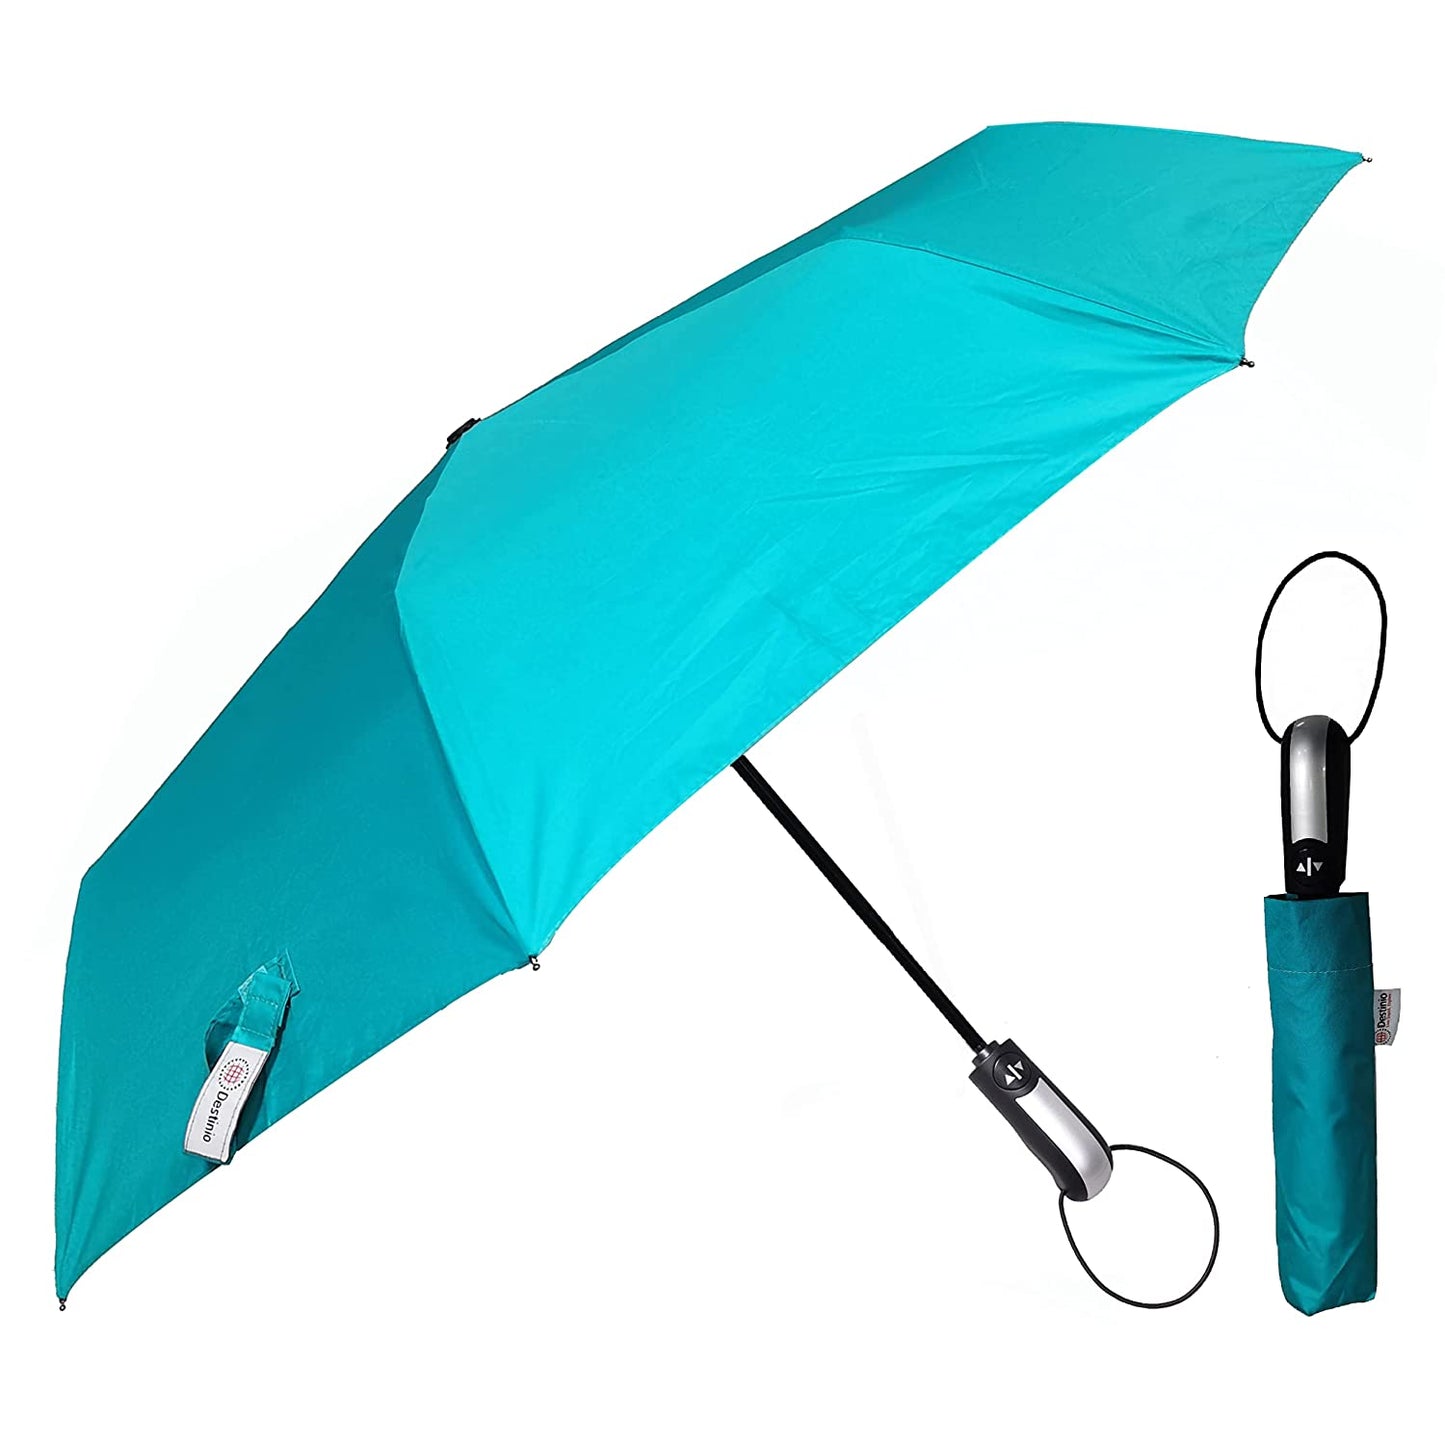 Foldable Umbrella - Umberalla for Rain, Foldable Umberalla For Men, Women, Kids, Girls, Boys - 3 Fold with Auto Open and Close